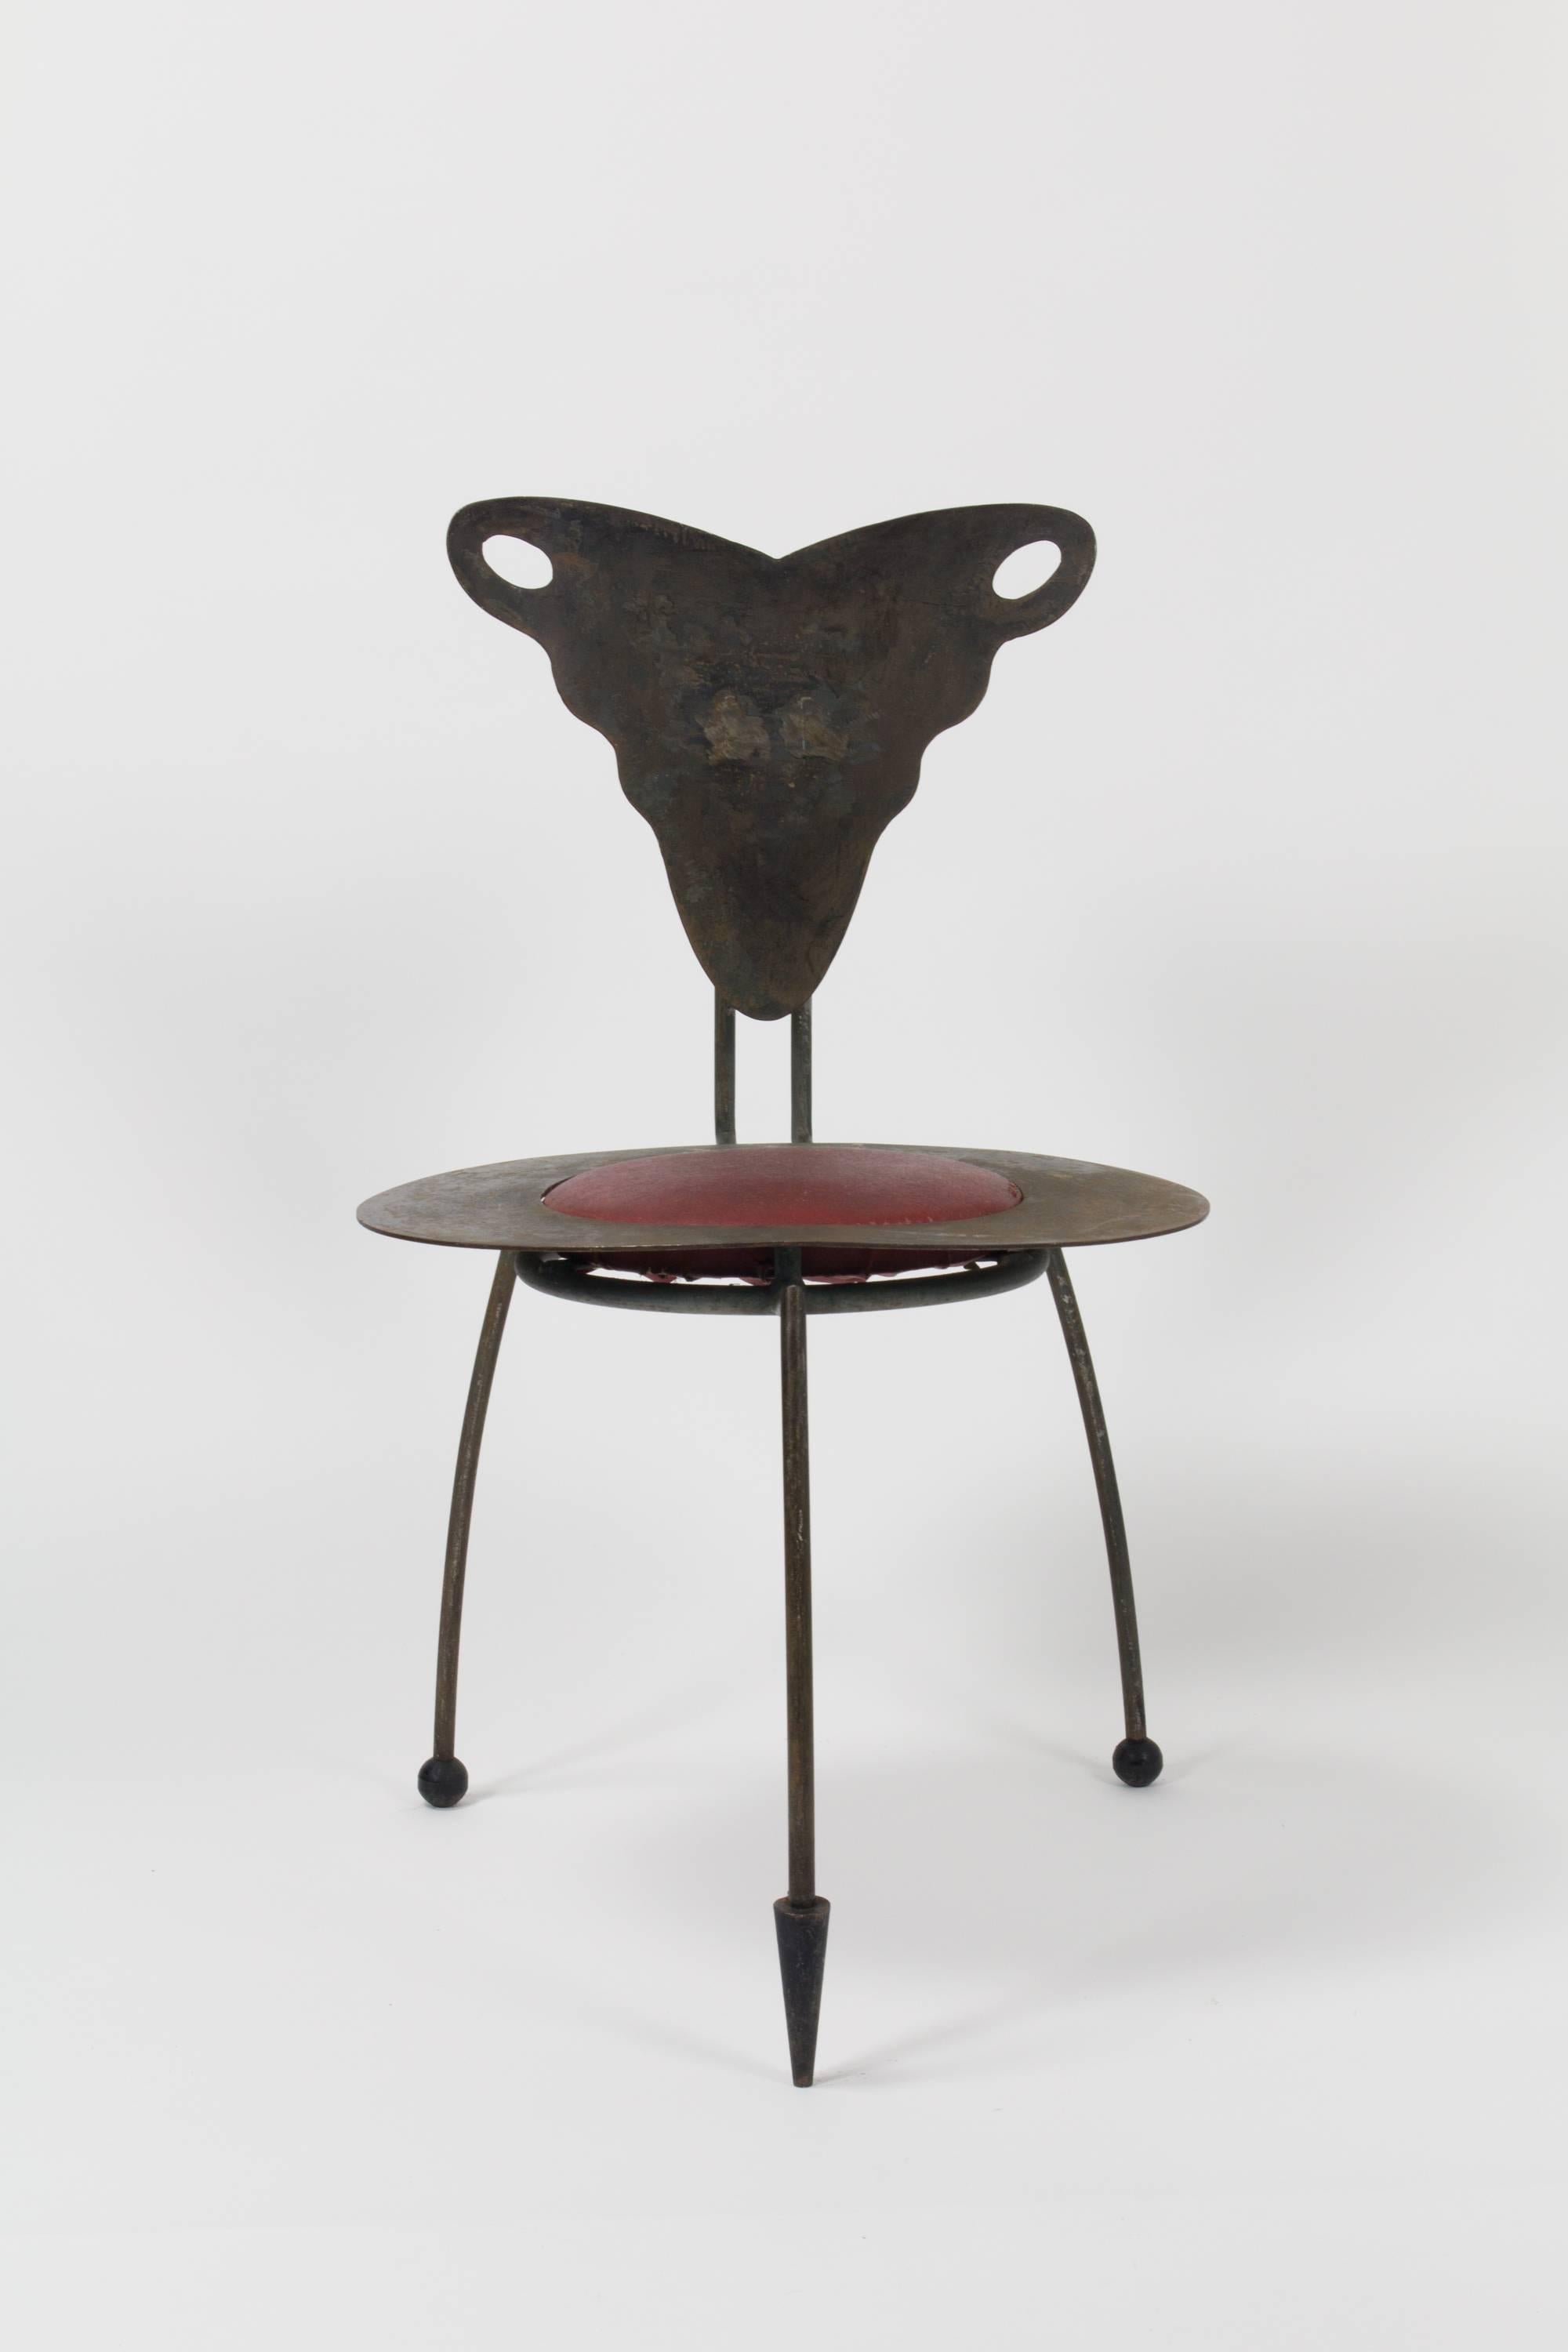 Anonymous three-legged sculptural art-chair with praying mantis motif, comprised of hand cut and welded steel elements and floating seat cushion in maroon vinyl upholstery.